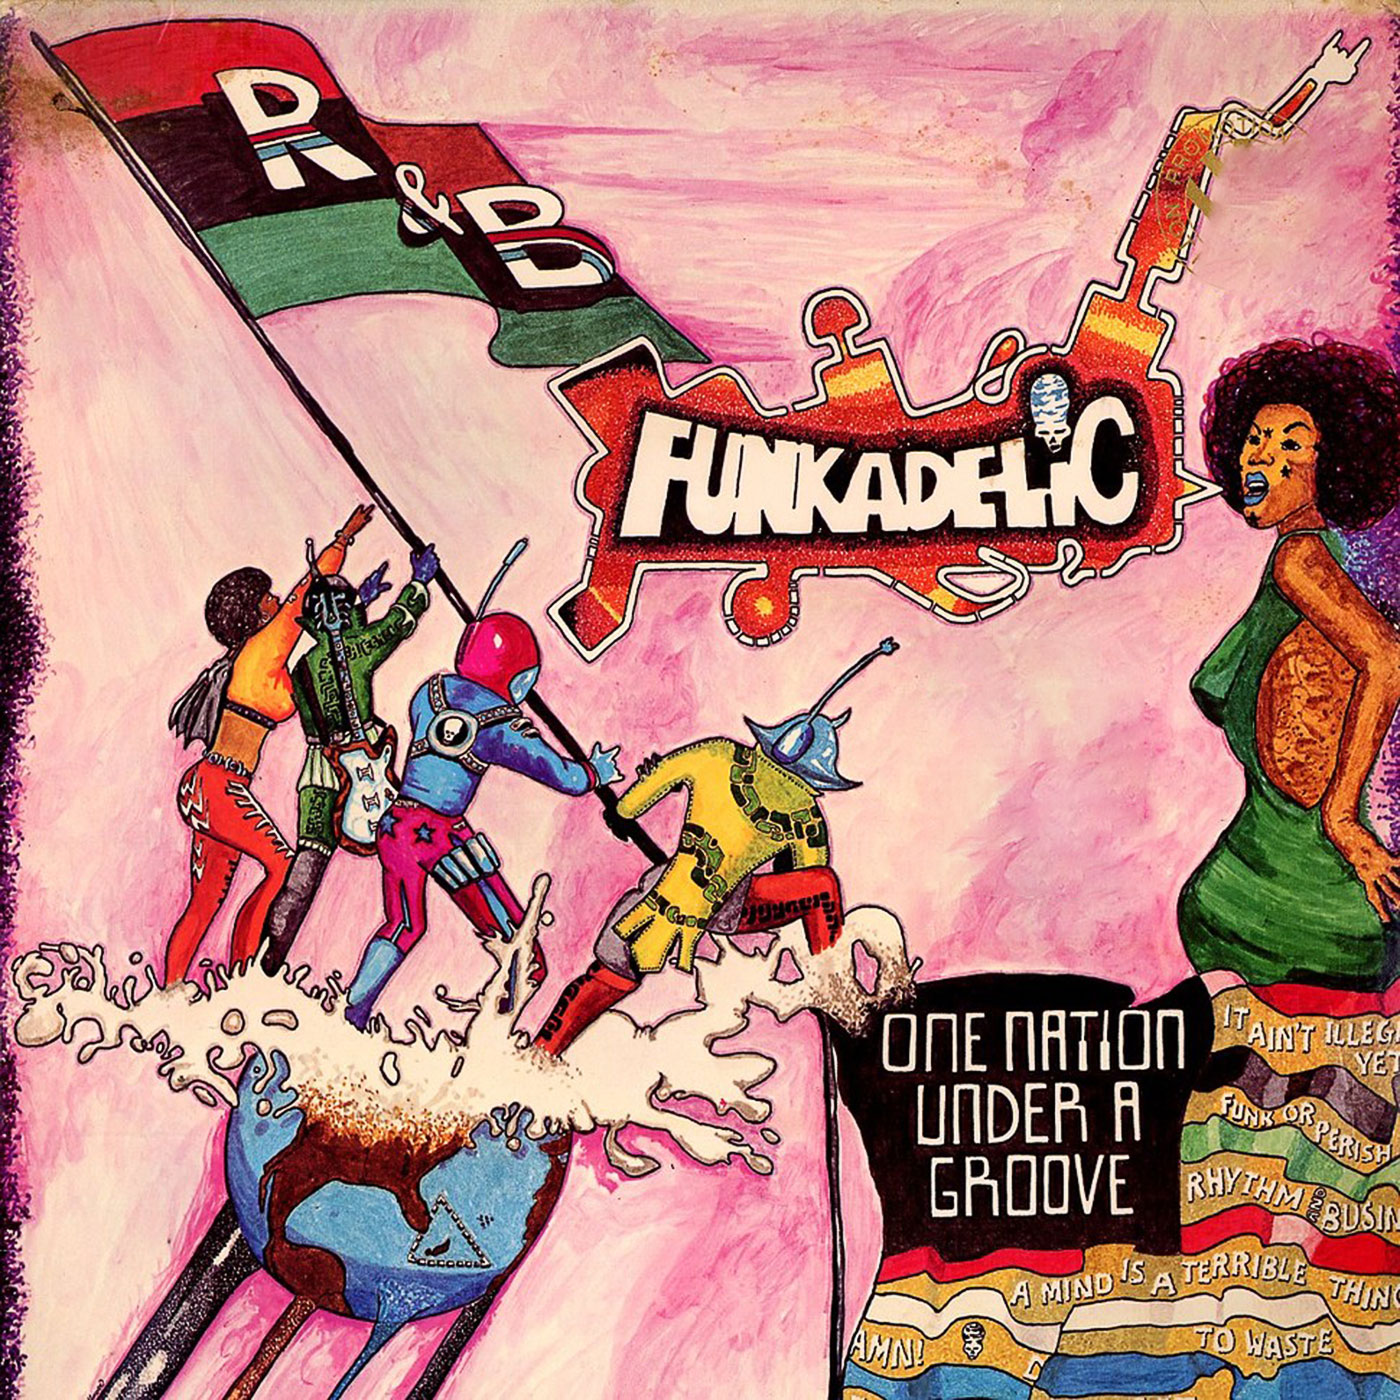 410 Funkadelic – One Nation Under a Groove